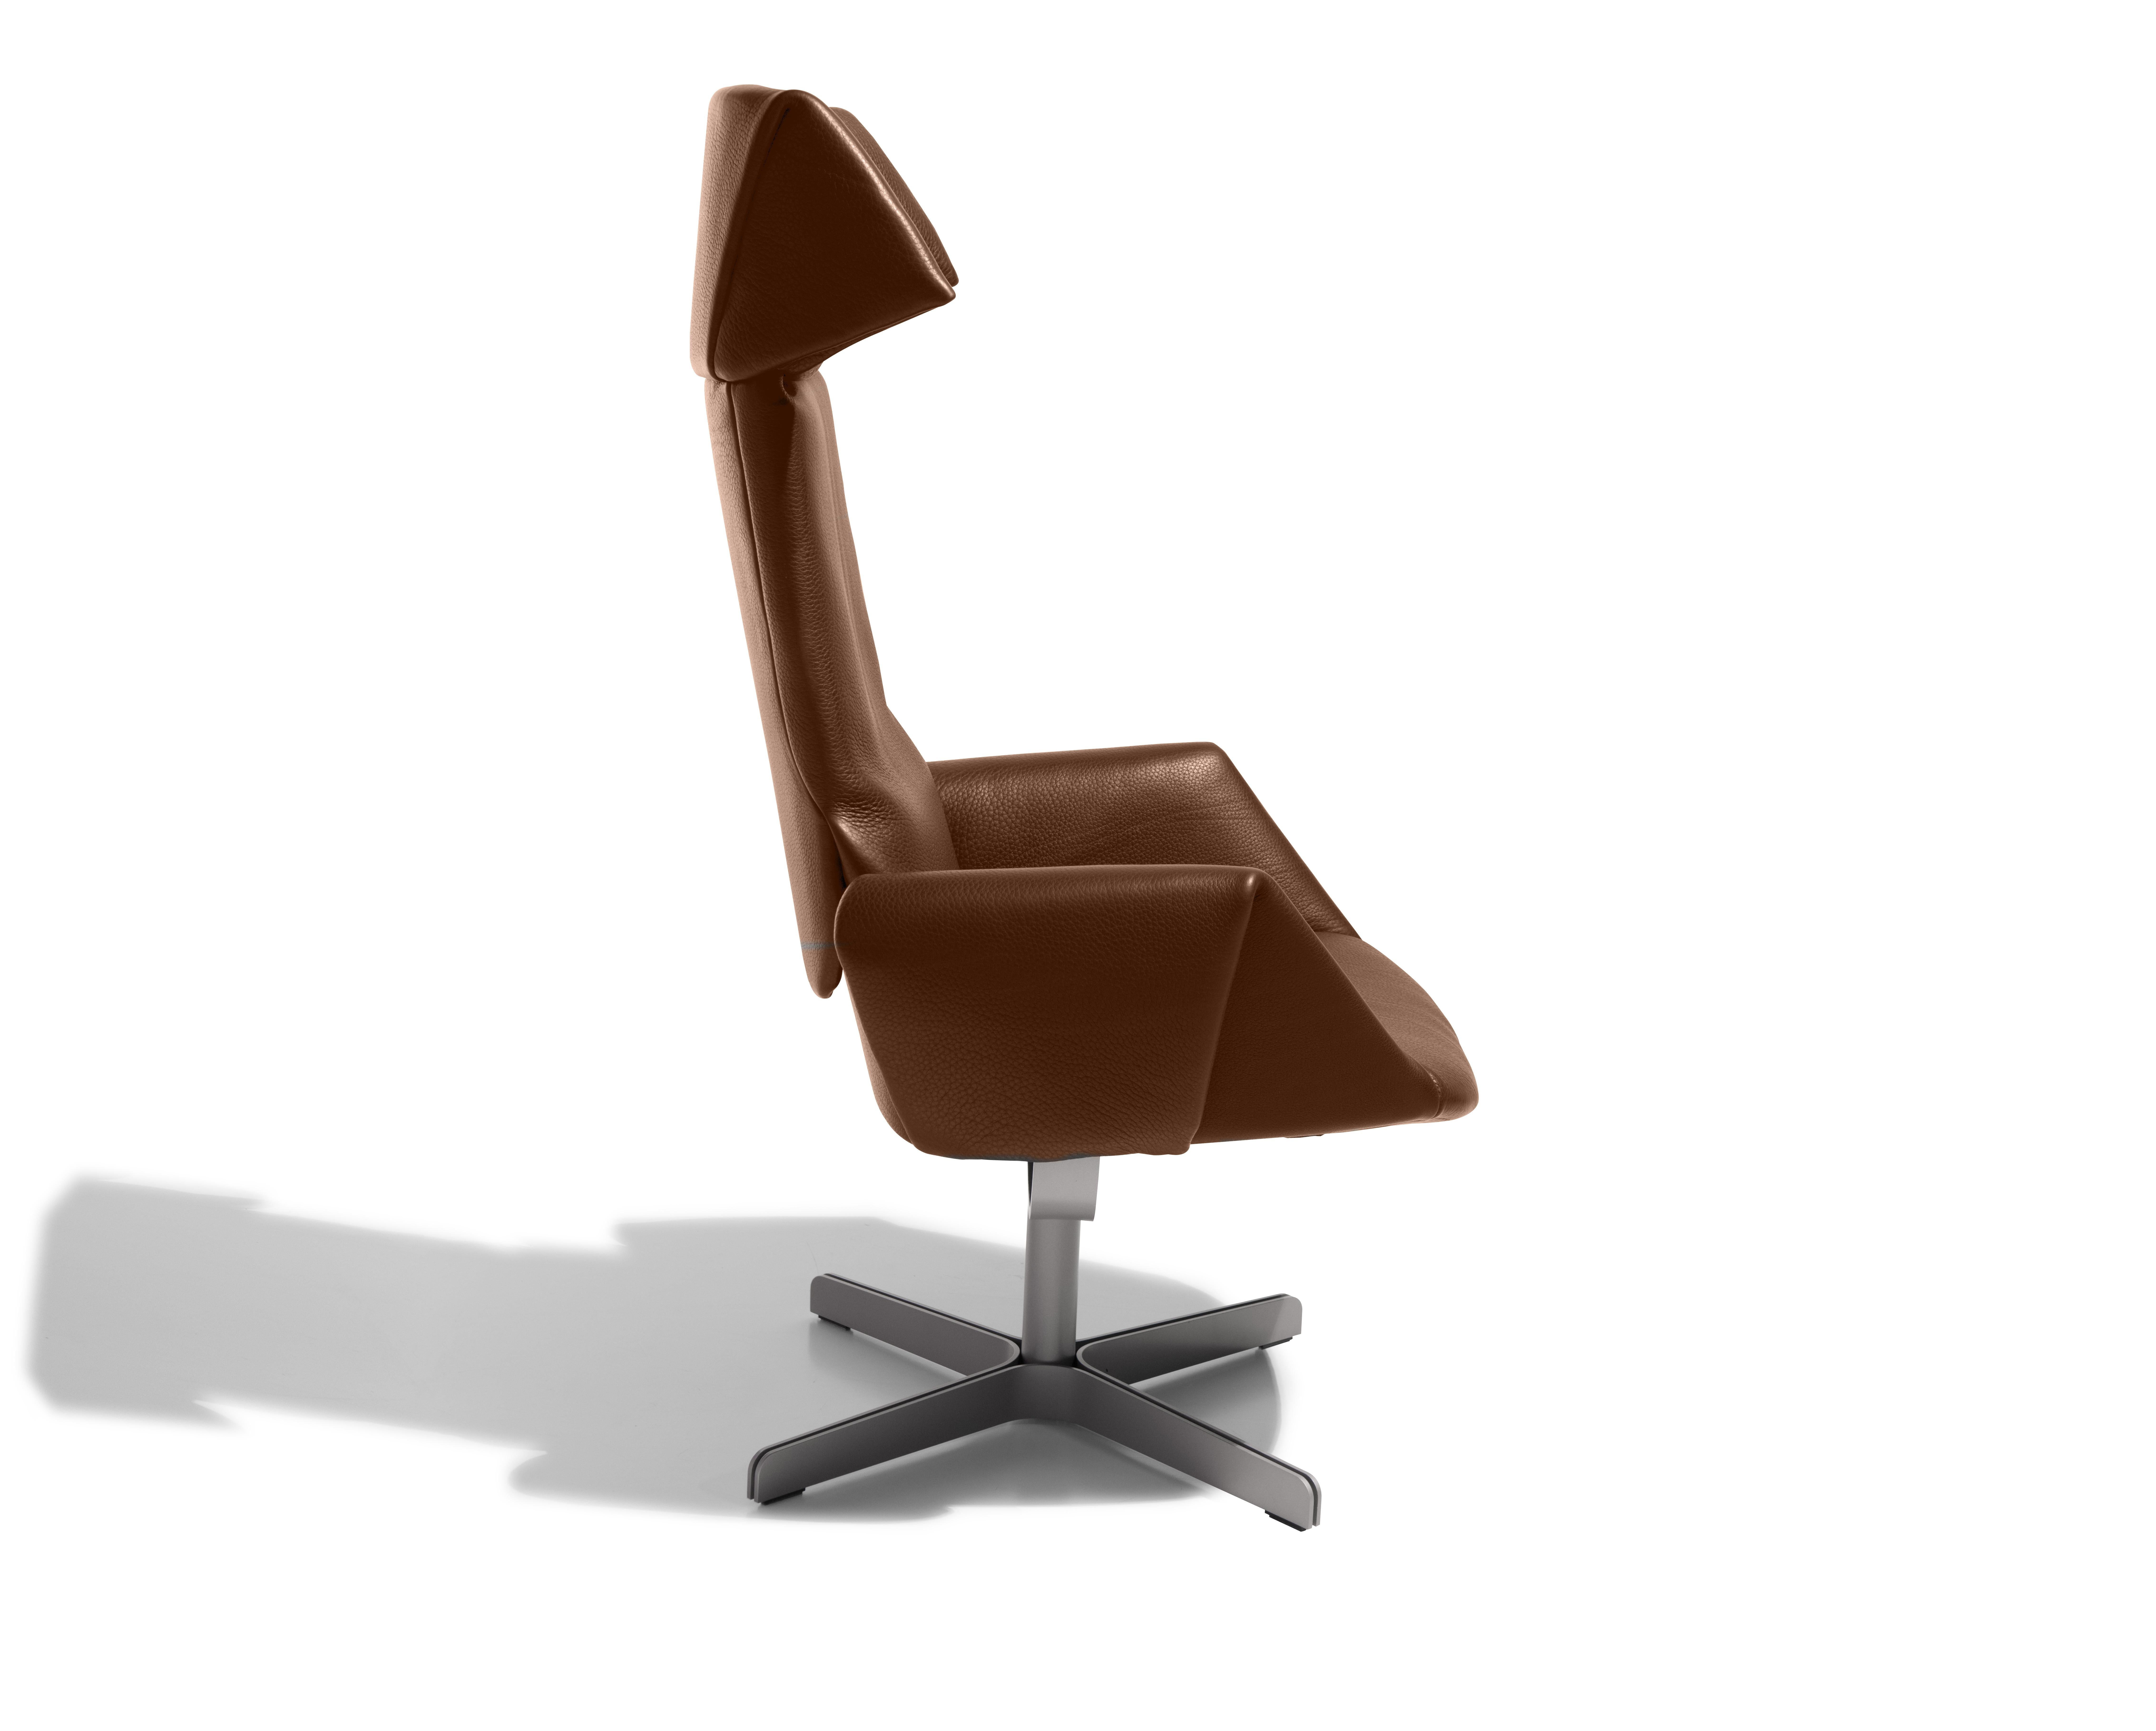 Revolutionary seating concept

DS-343 is an armchair that moves when the person seated moves – because the object is constructed not with a classic seating surface that stops at the backrest, but with one that extends to the height of the pelvis. If